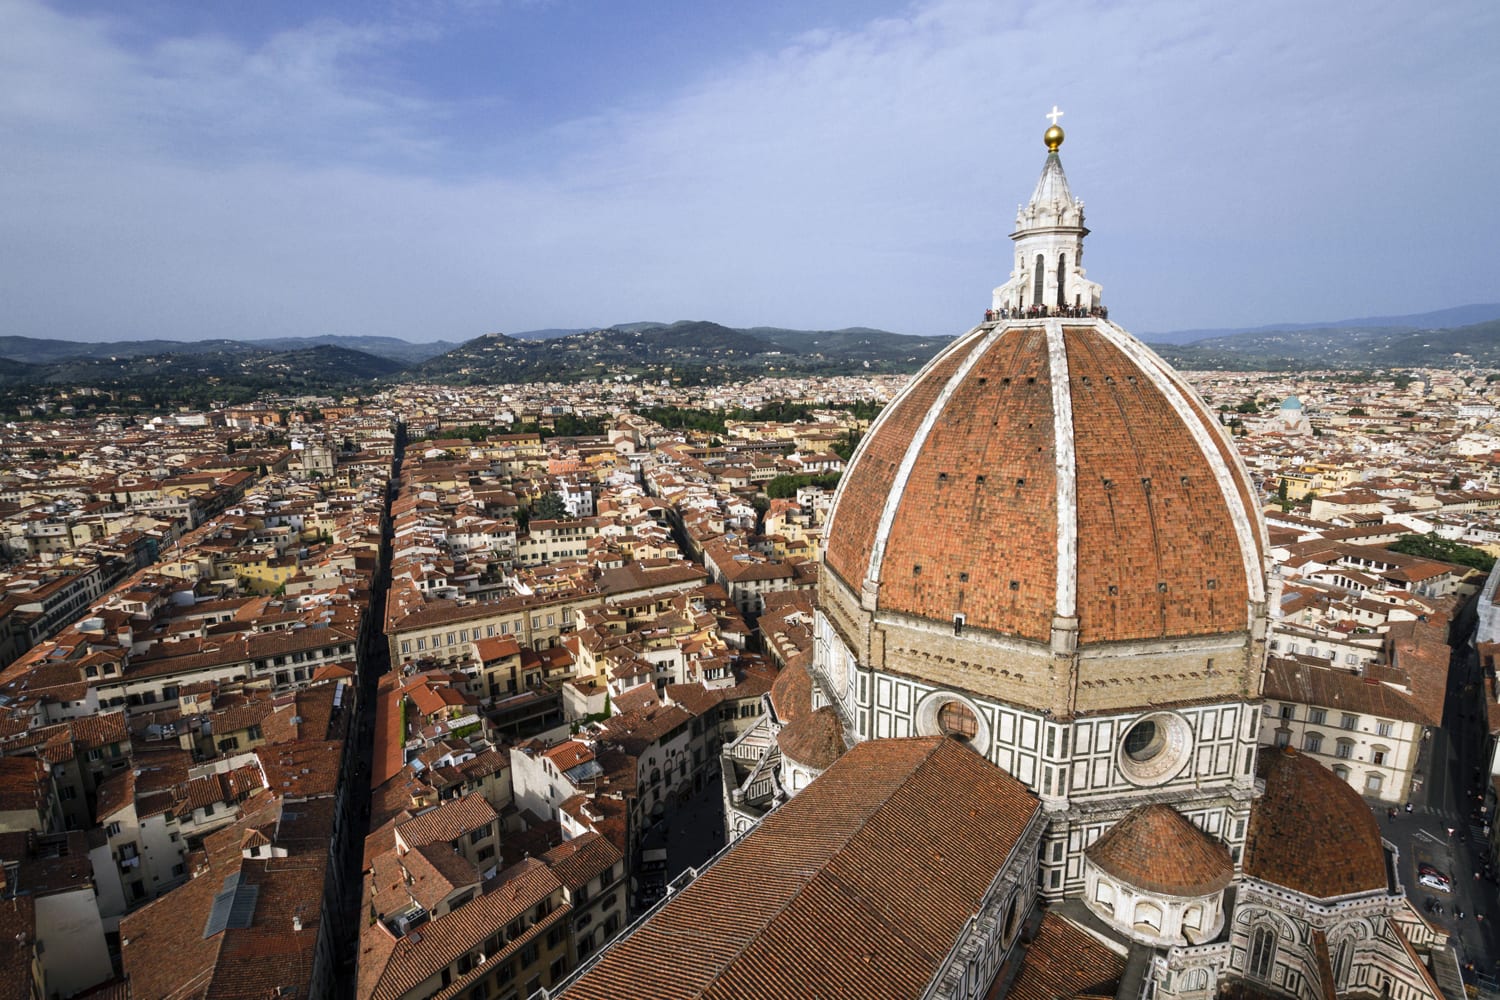 The Florence Duomo is one of the greatest works of architecture in the world.